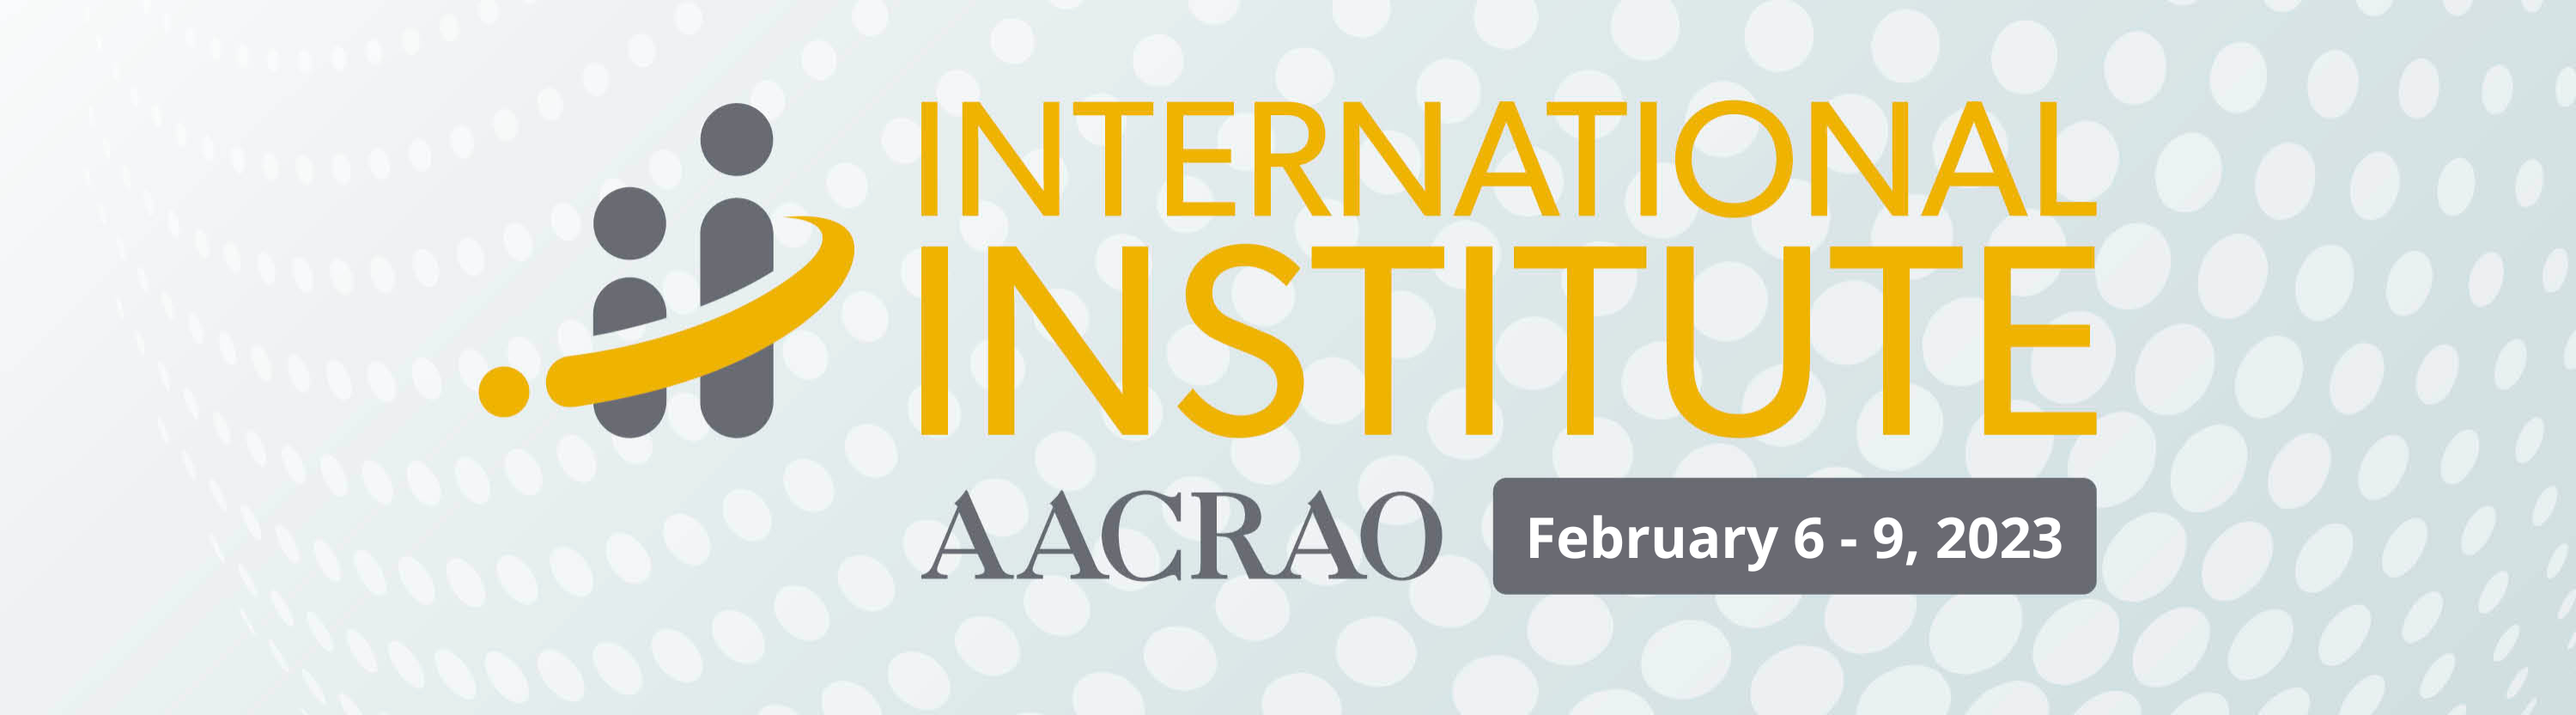 White and Yellow International Institute Banner with date - February 6 - 9, 2023.